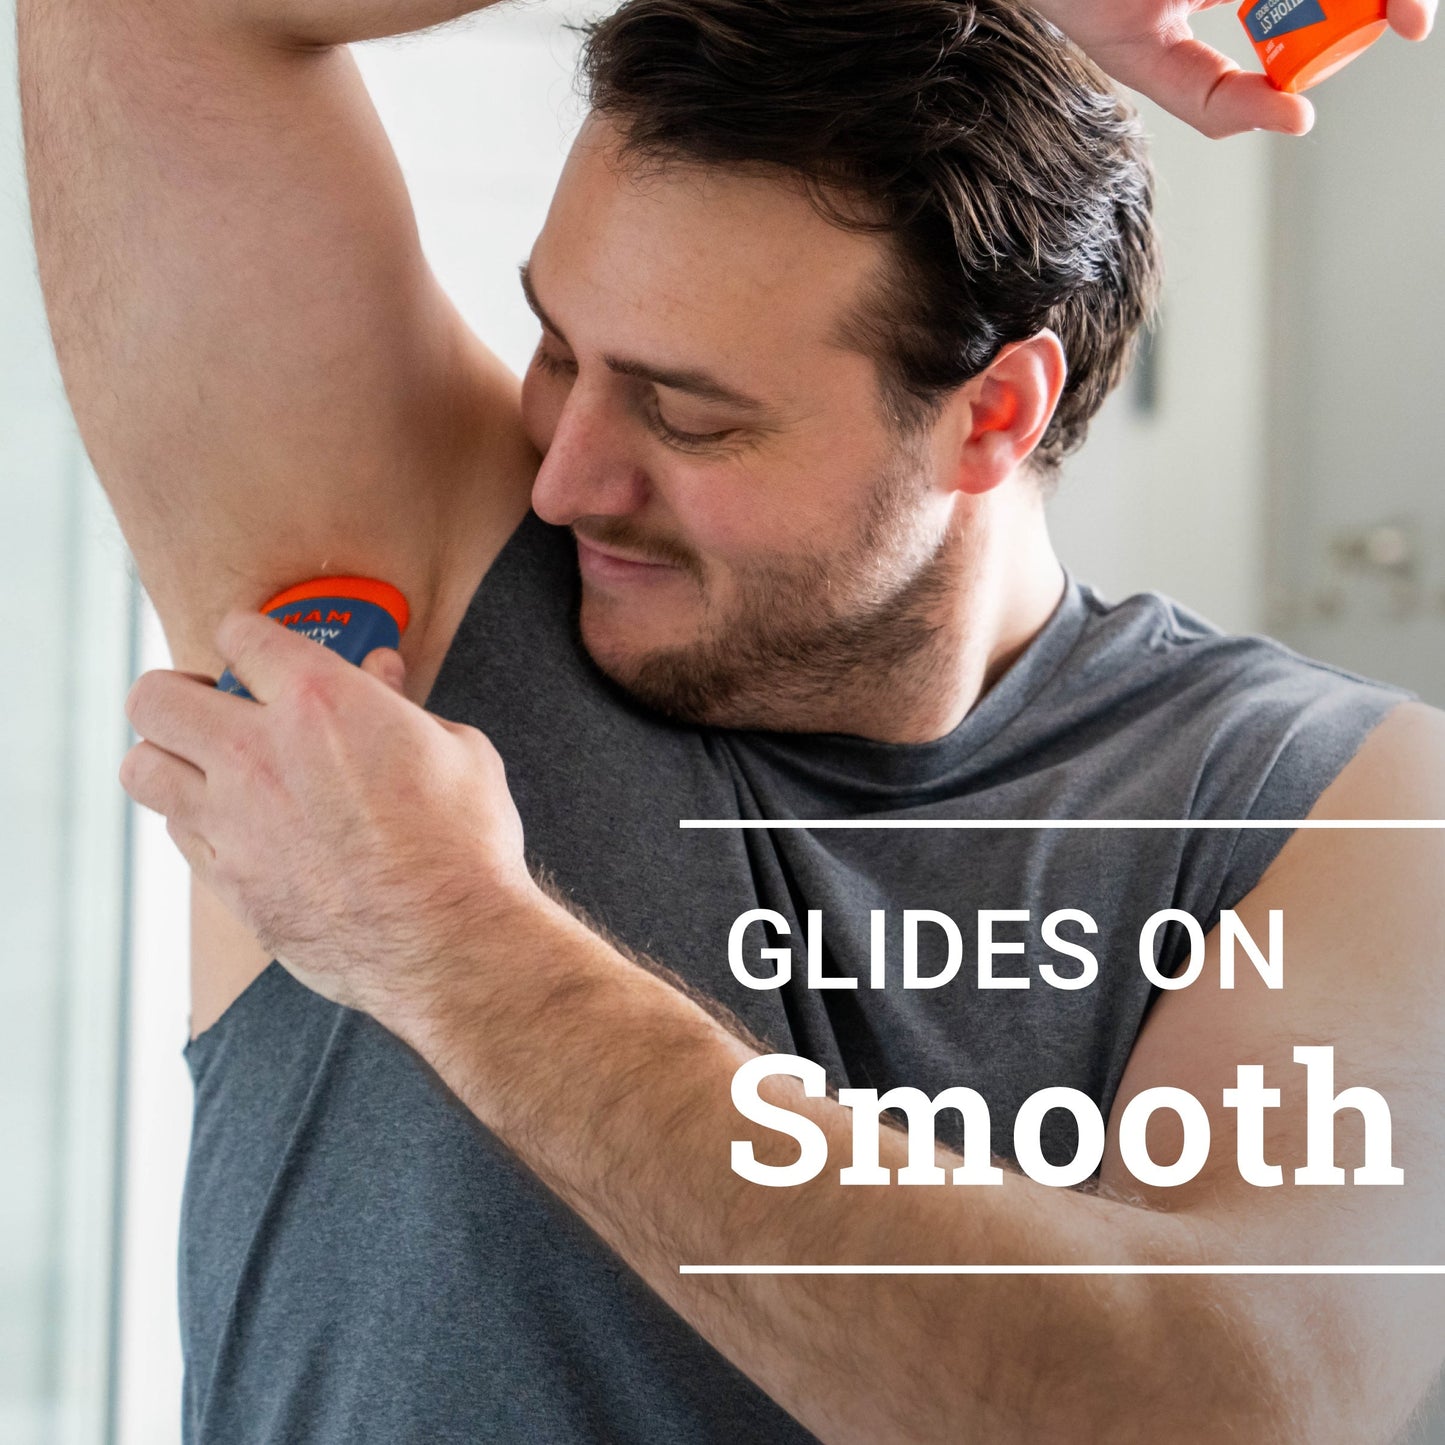 man smiling while applying pro sport solid stick deodorant to armpit with text: glides on smooth